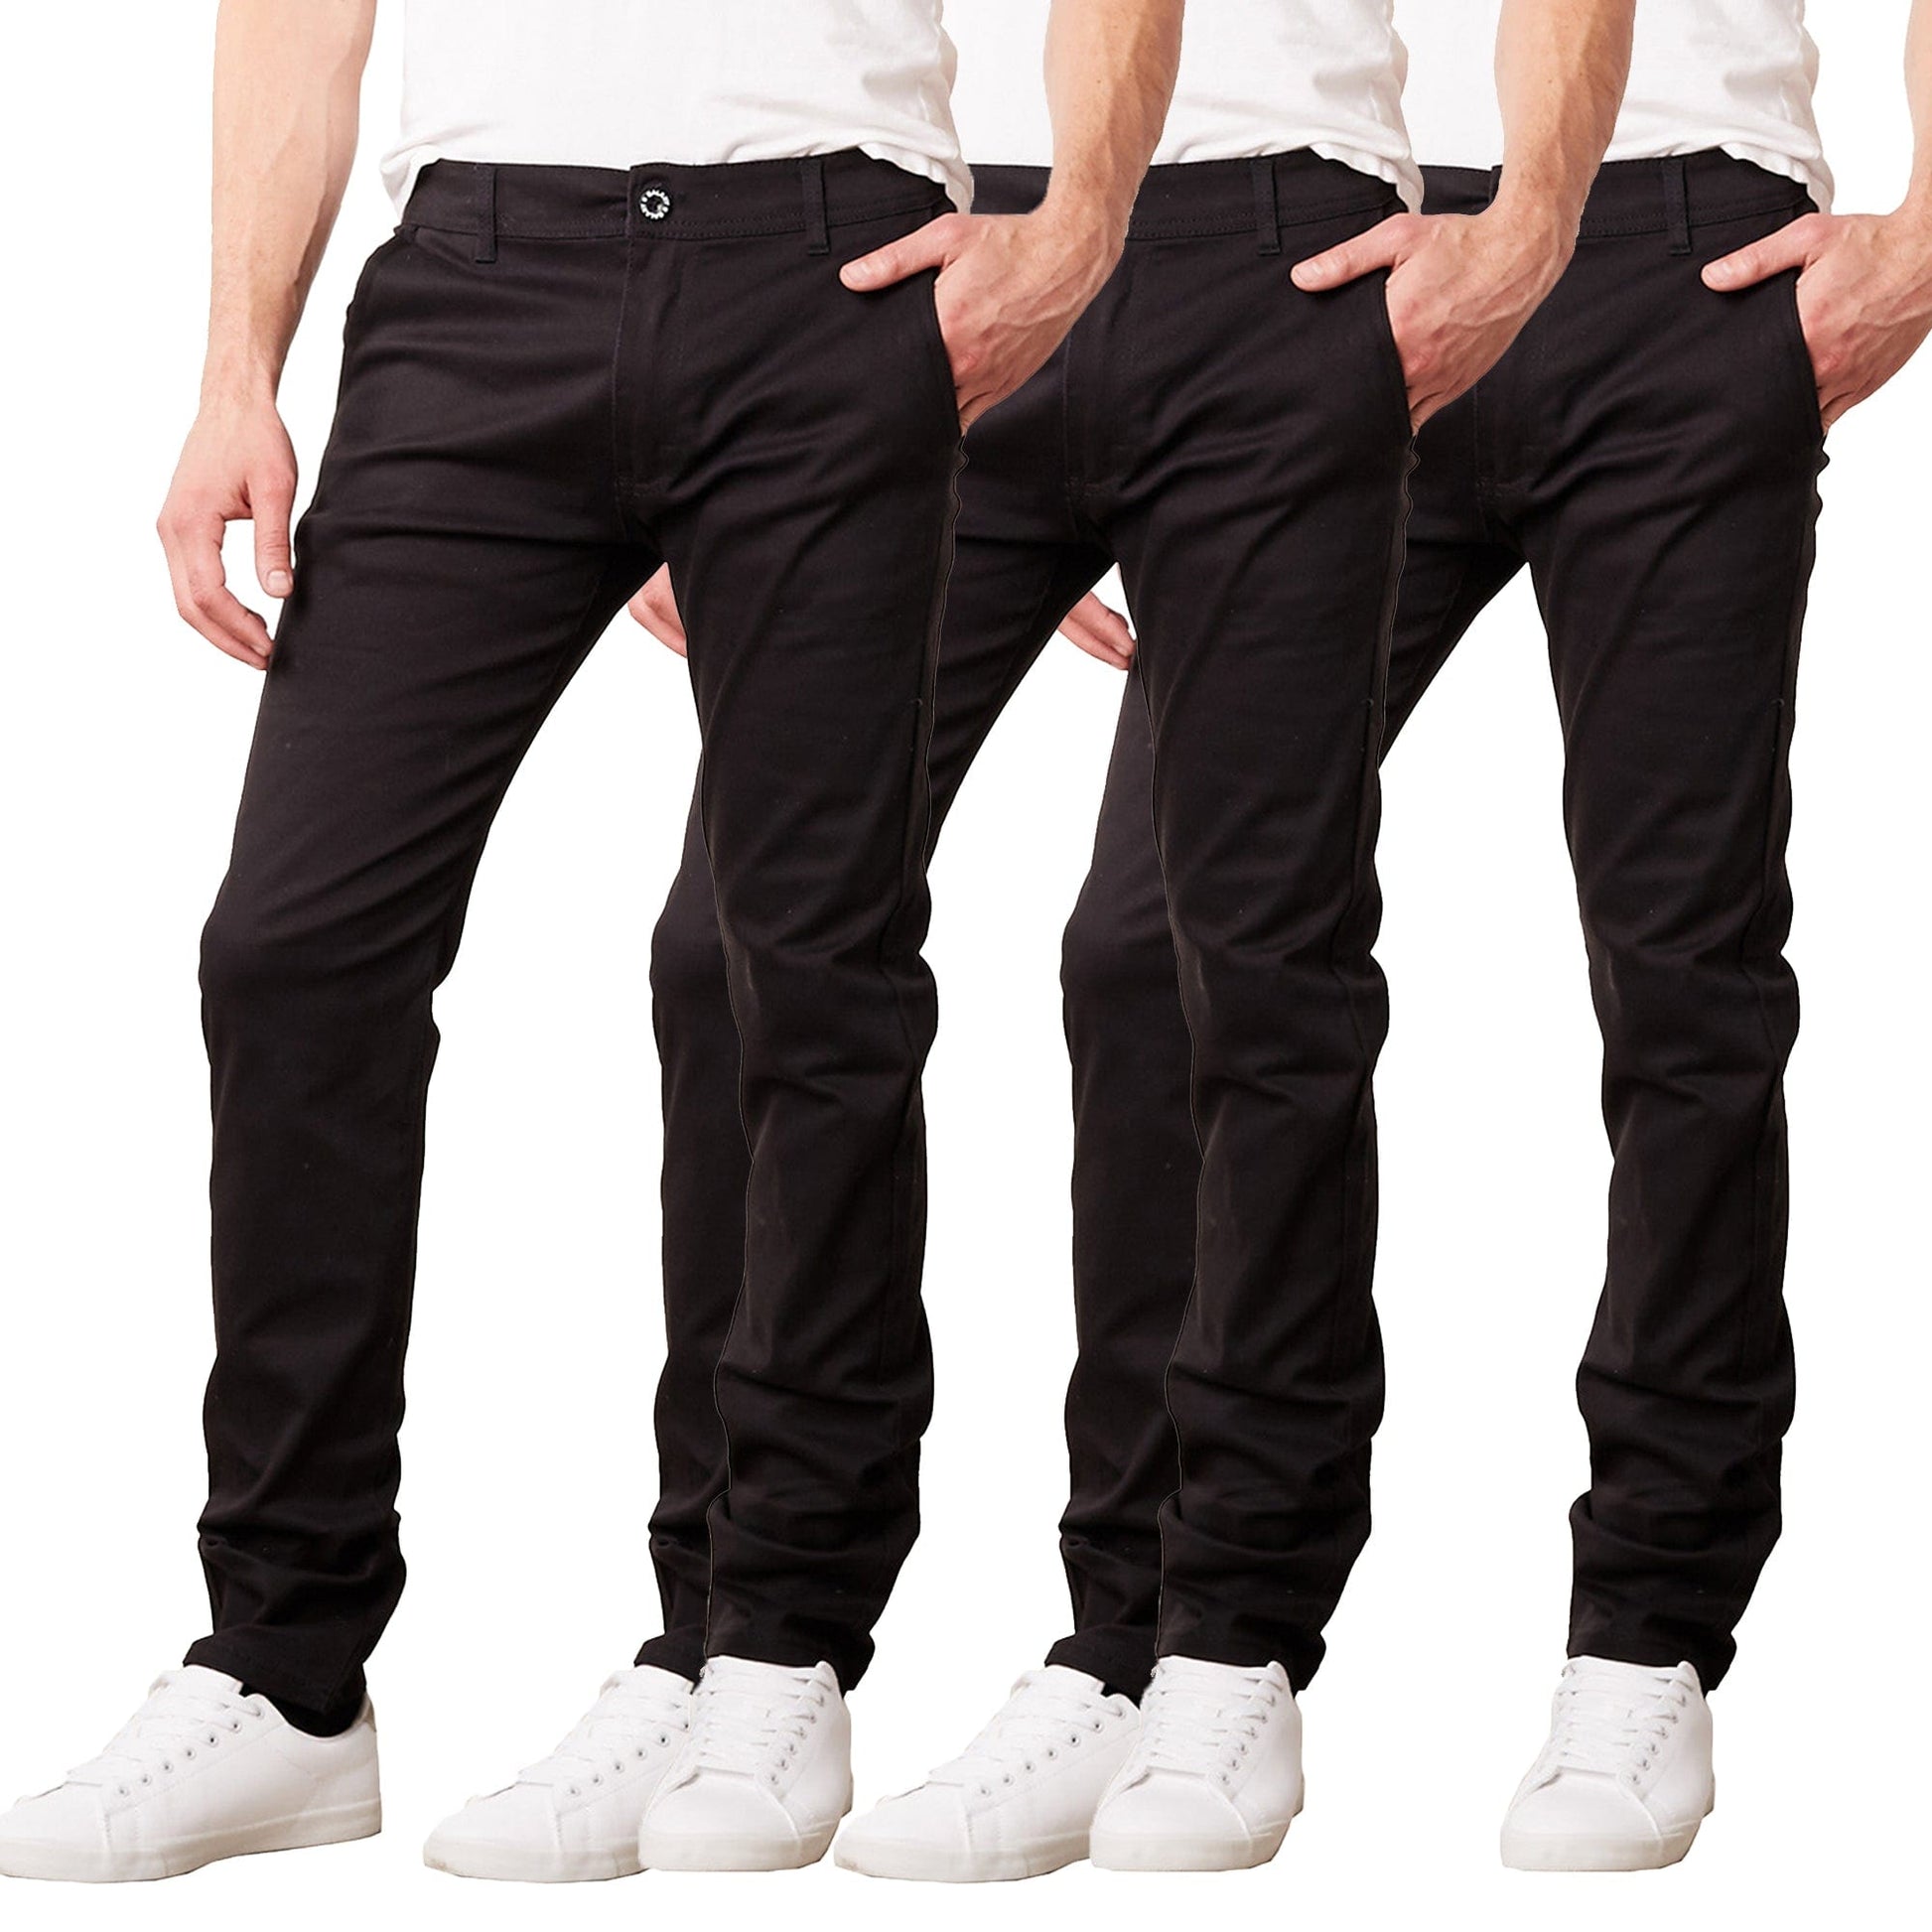 3-Pack Men's Super Stretch Slim Fit Everyday Chino Pants (Sizes, 30-42) 